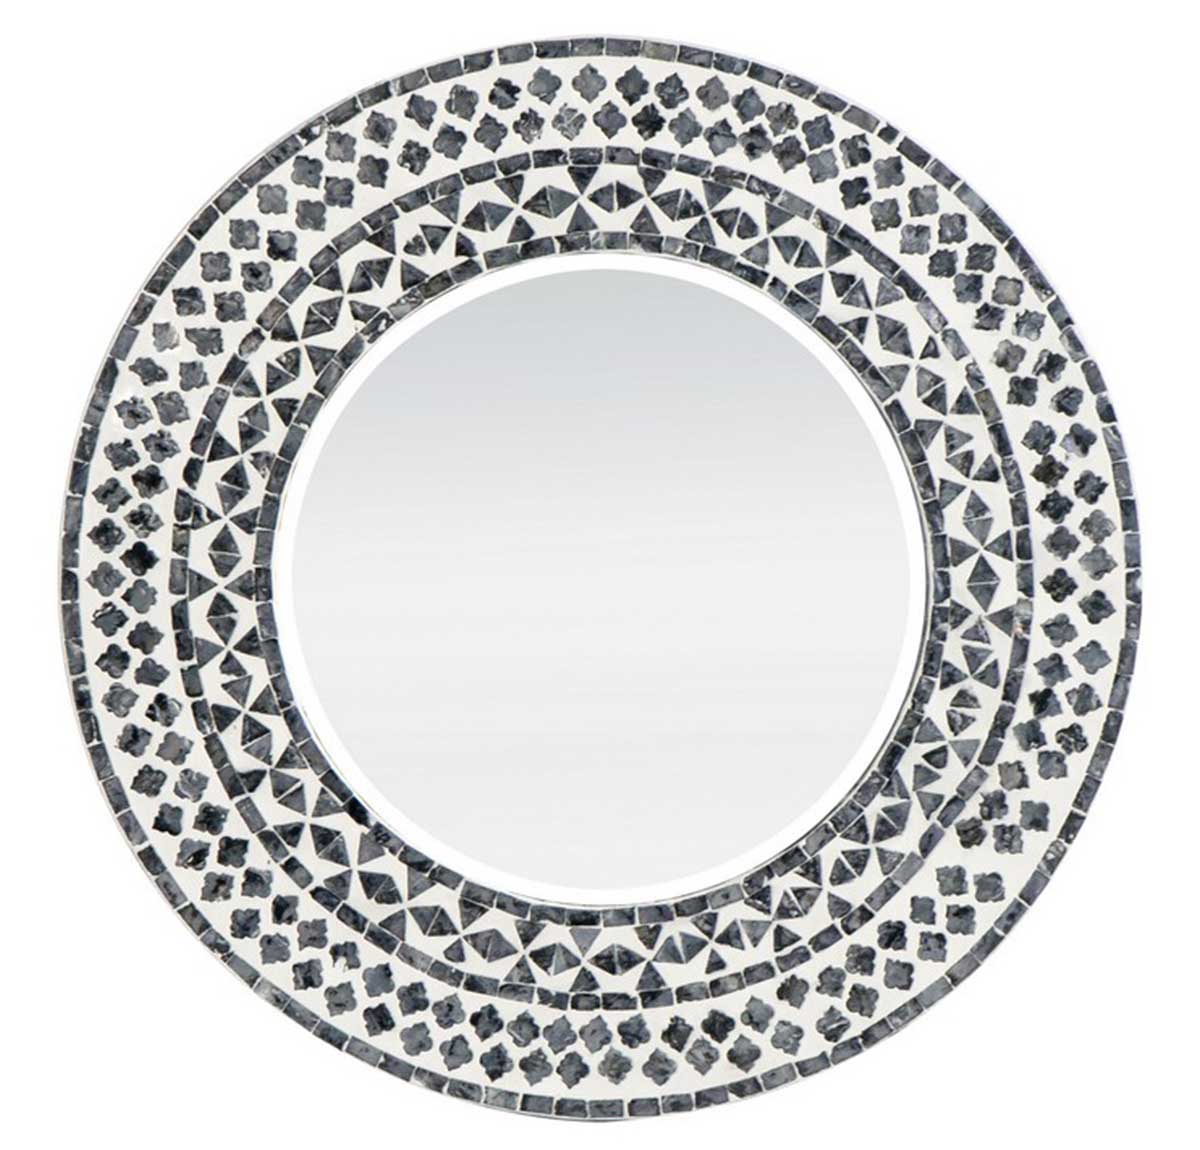 Round Capiz Framed Wall Hanging Mirror | Mirrors | Home Decor